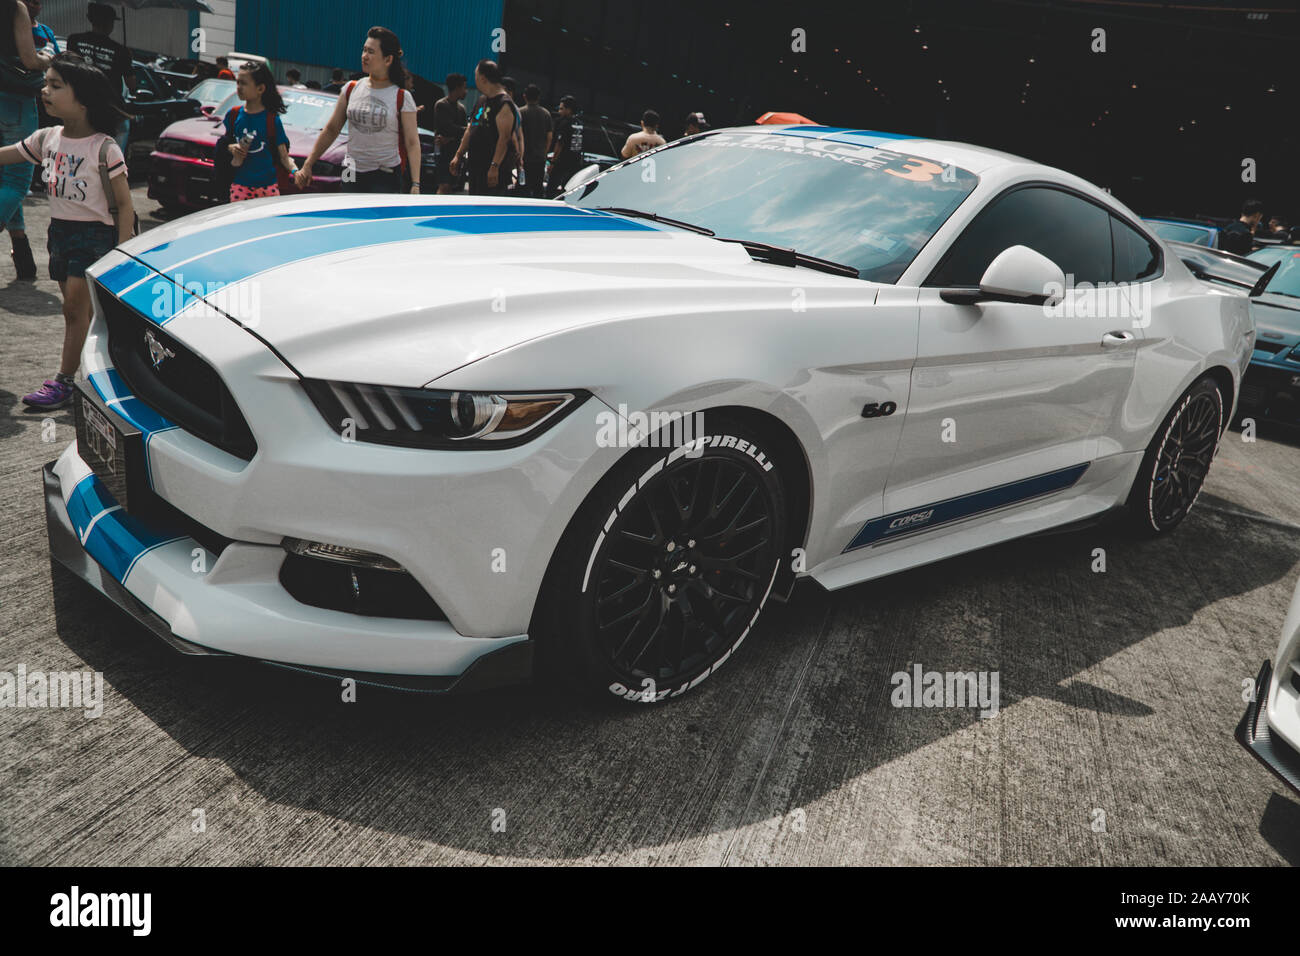 White Ford Mustang Banque d'image et photos - Alamy